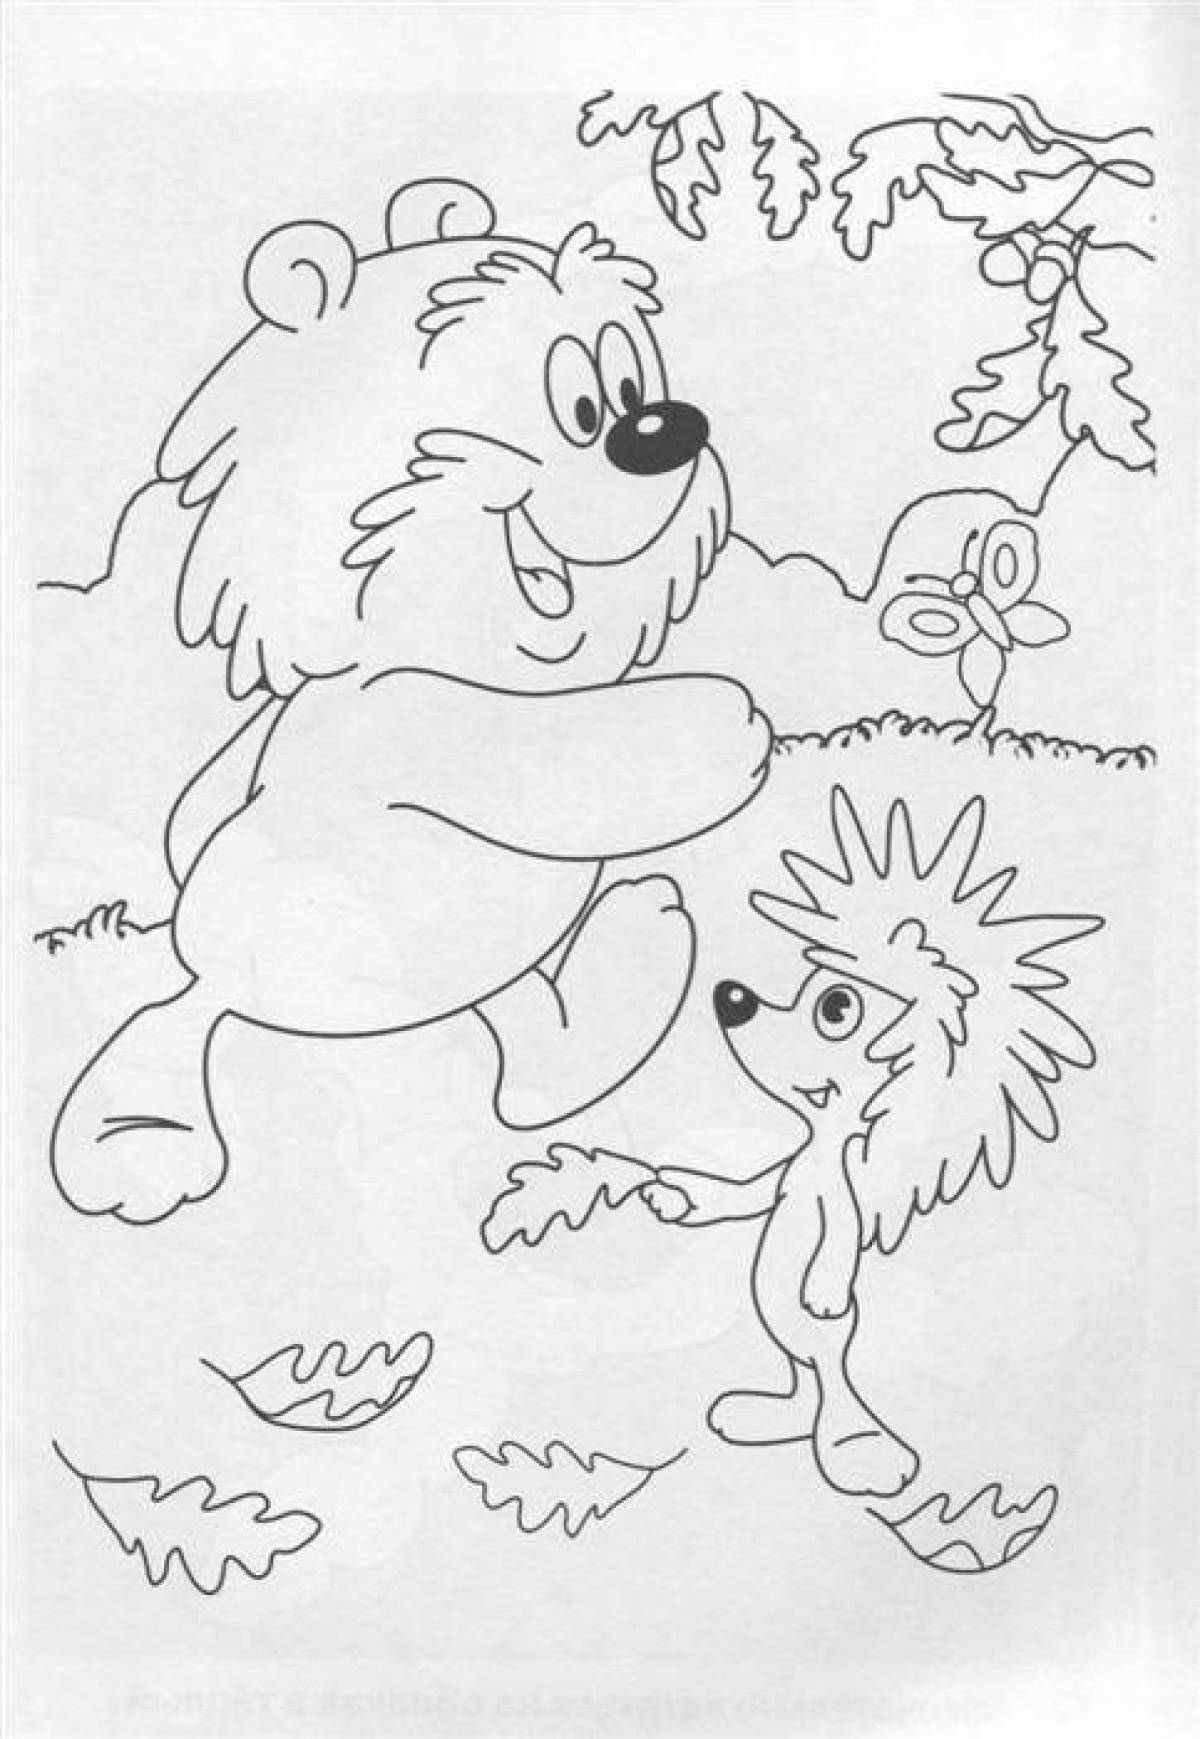 Tryam hello playful coloring page